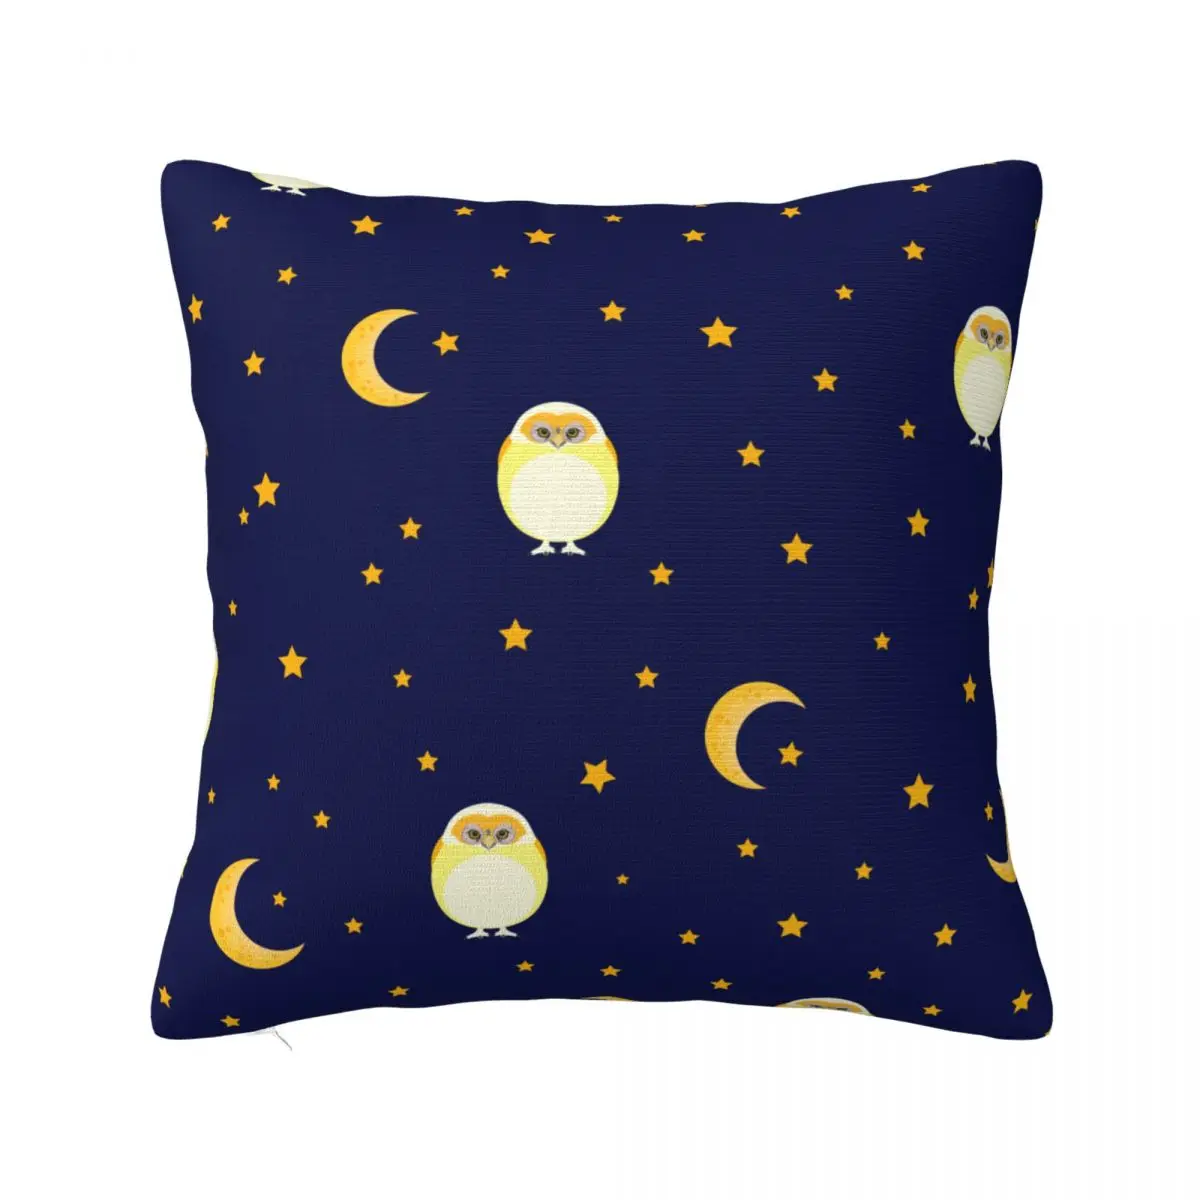 

Owl Animal Plaid Pillowcase Printed Polyester Cushion Cover Decoration Cartoon Pillow Case Cover Home Zippered 18"